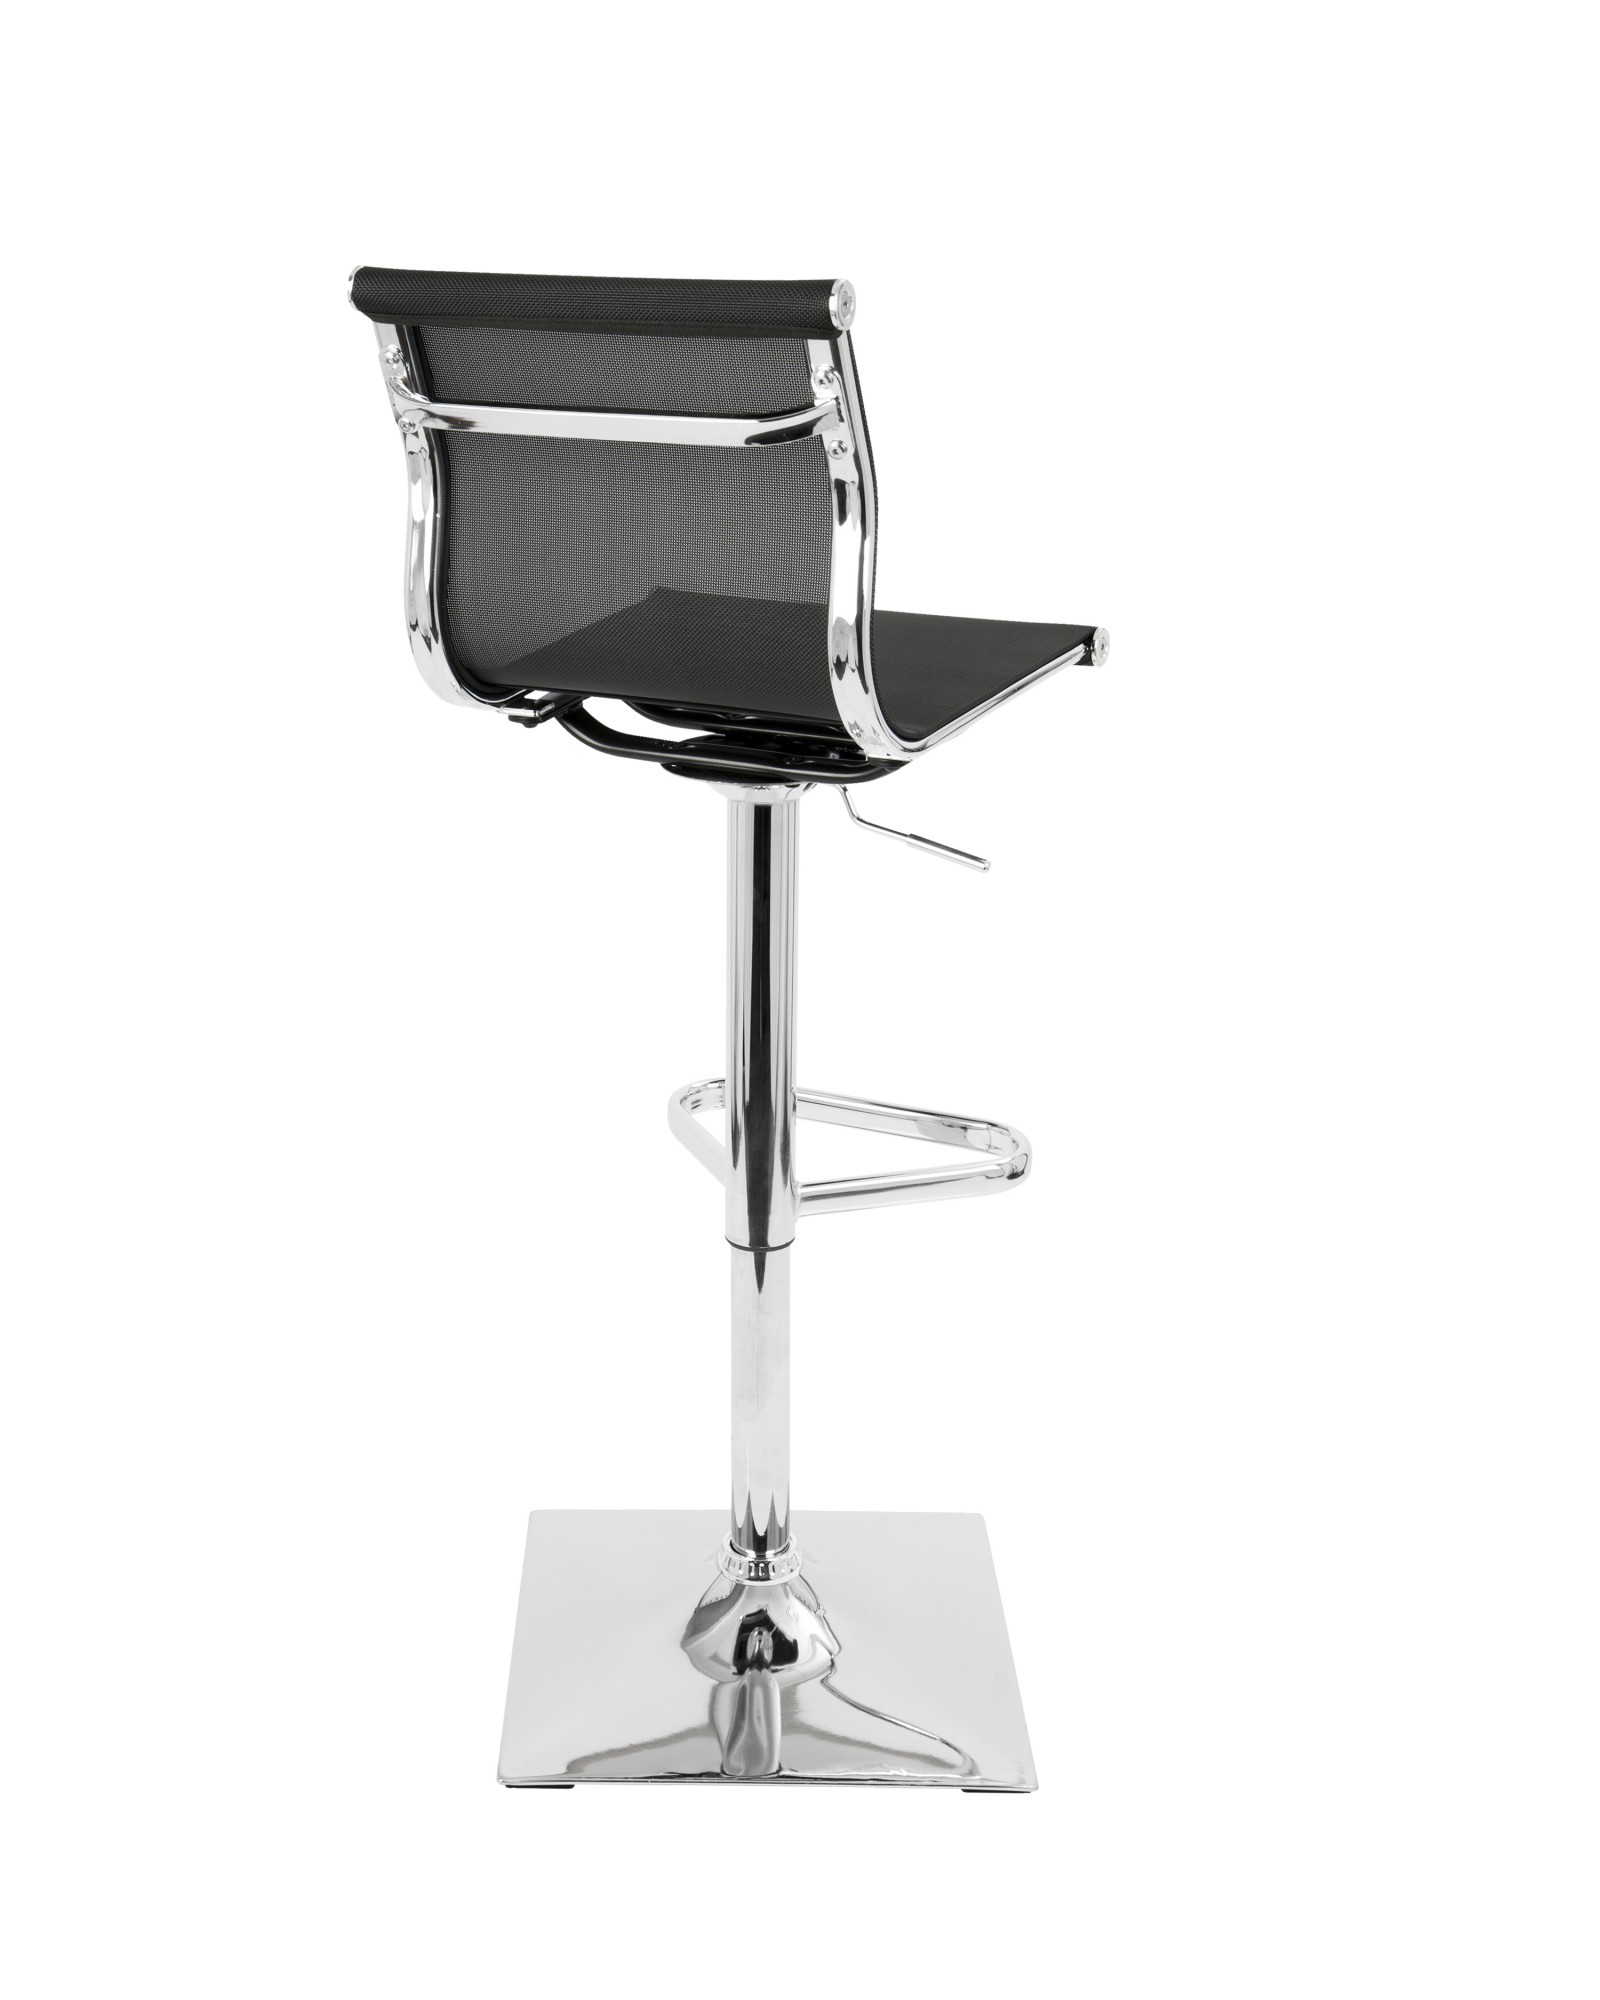 Mirage Contemporary Adjustable Barstool with Swivel in Black